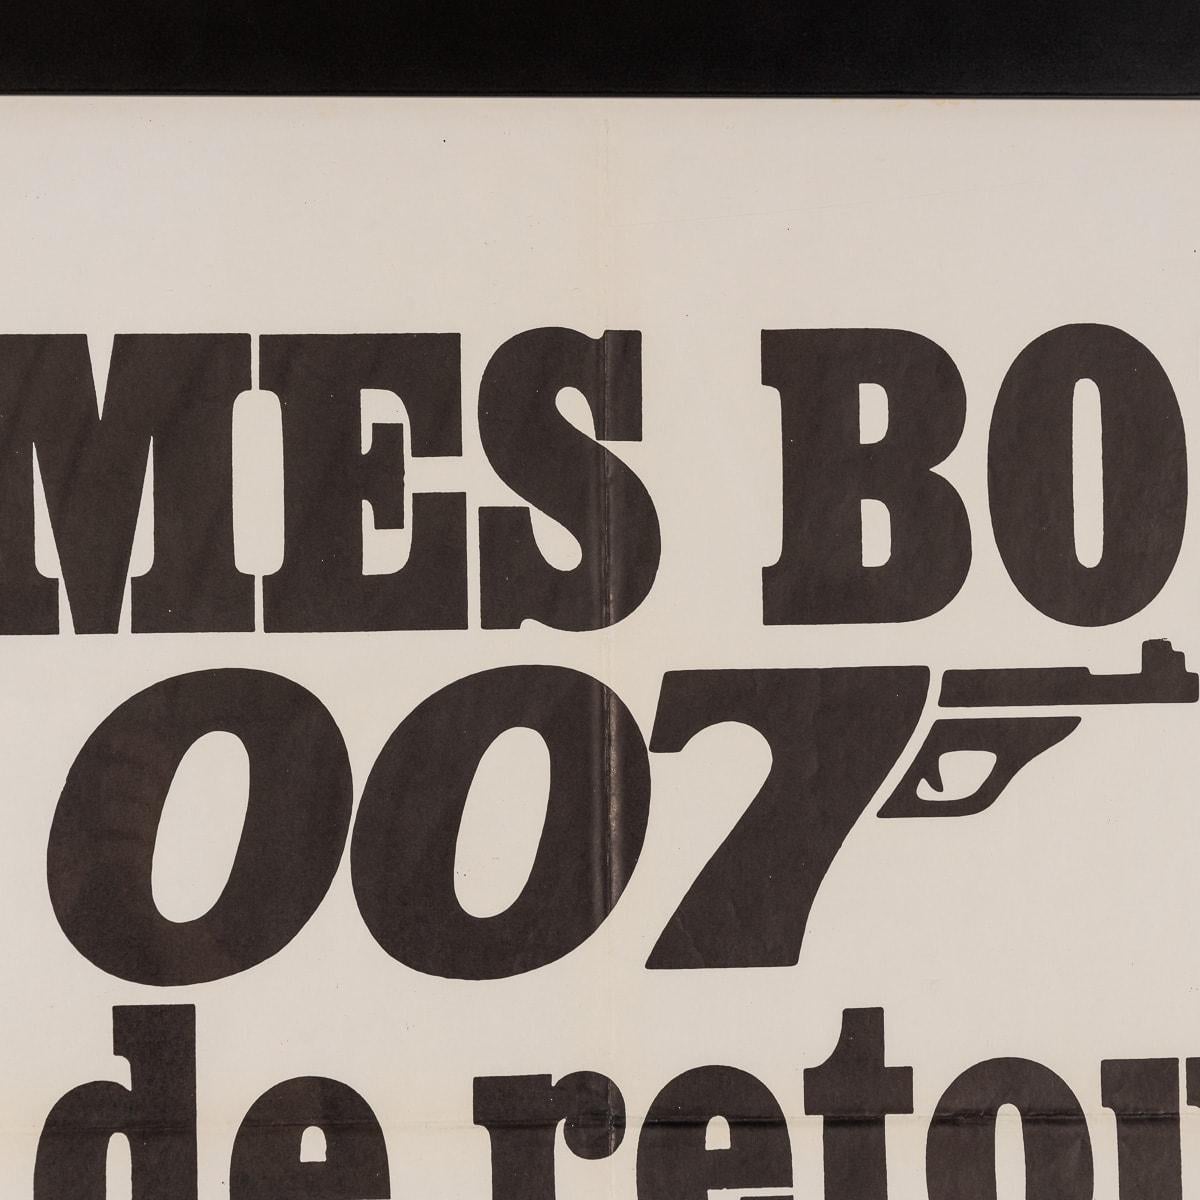 Original French Release James Bond On Her Majesty's Secret Service Poster c.1969 In Good Condition For Sale In Royal Tunbridge Wells, Kent